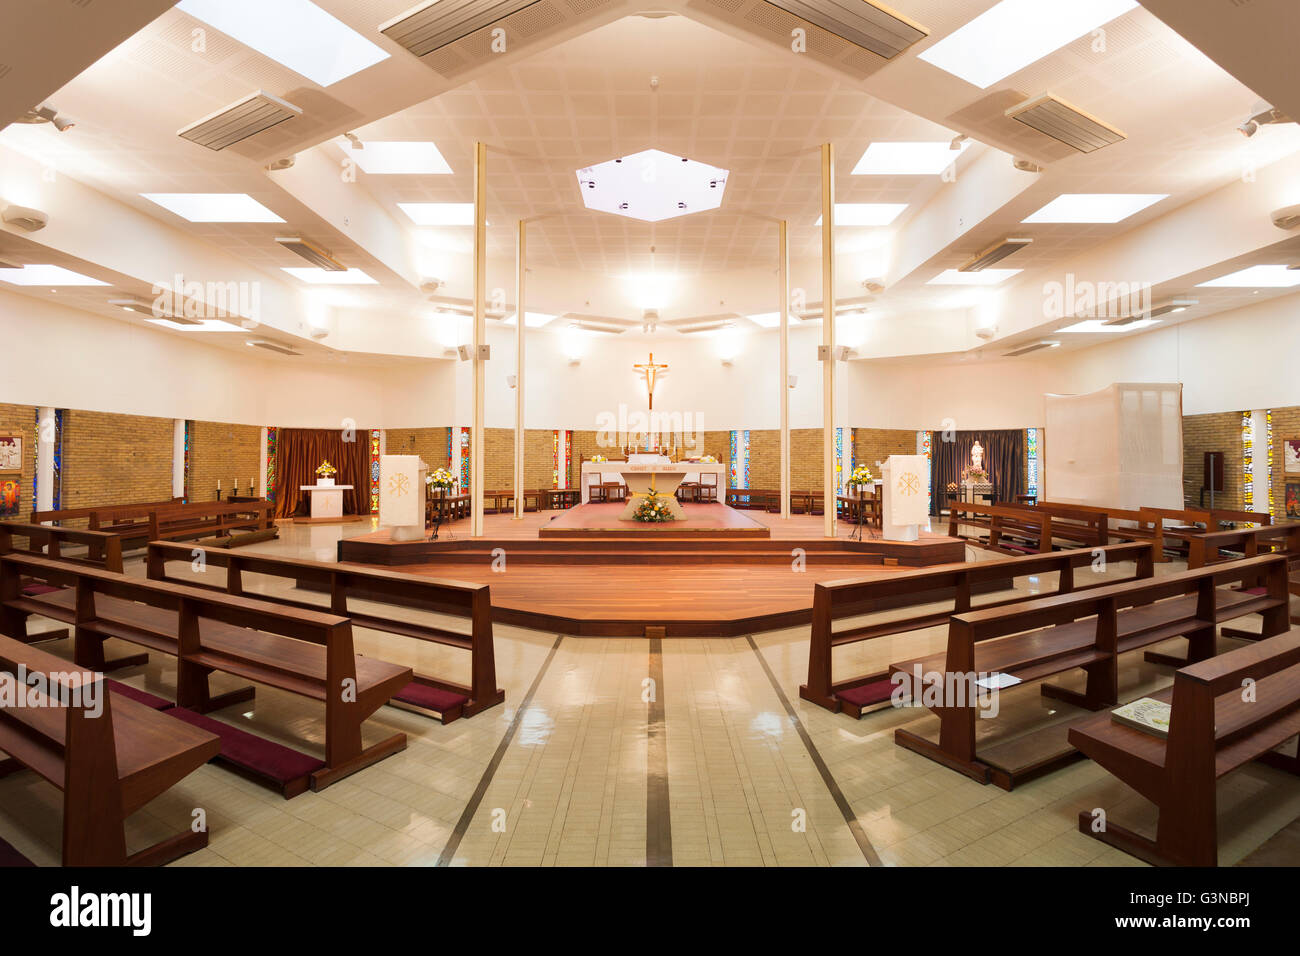 Interior of modern catholic church with pews and altar, St Mary's Church in Alton, Hampshire, England, United Kingdom, Europe Stock Photo